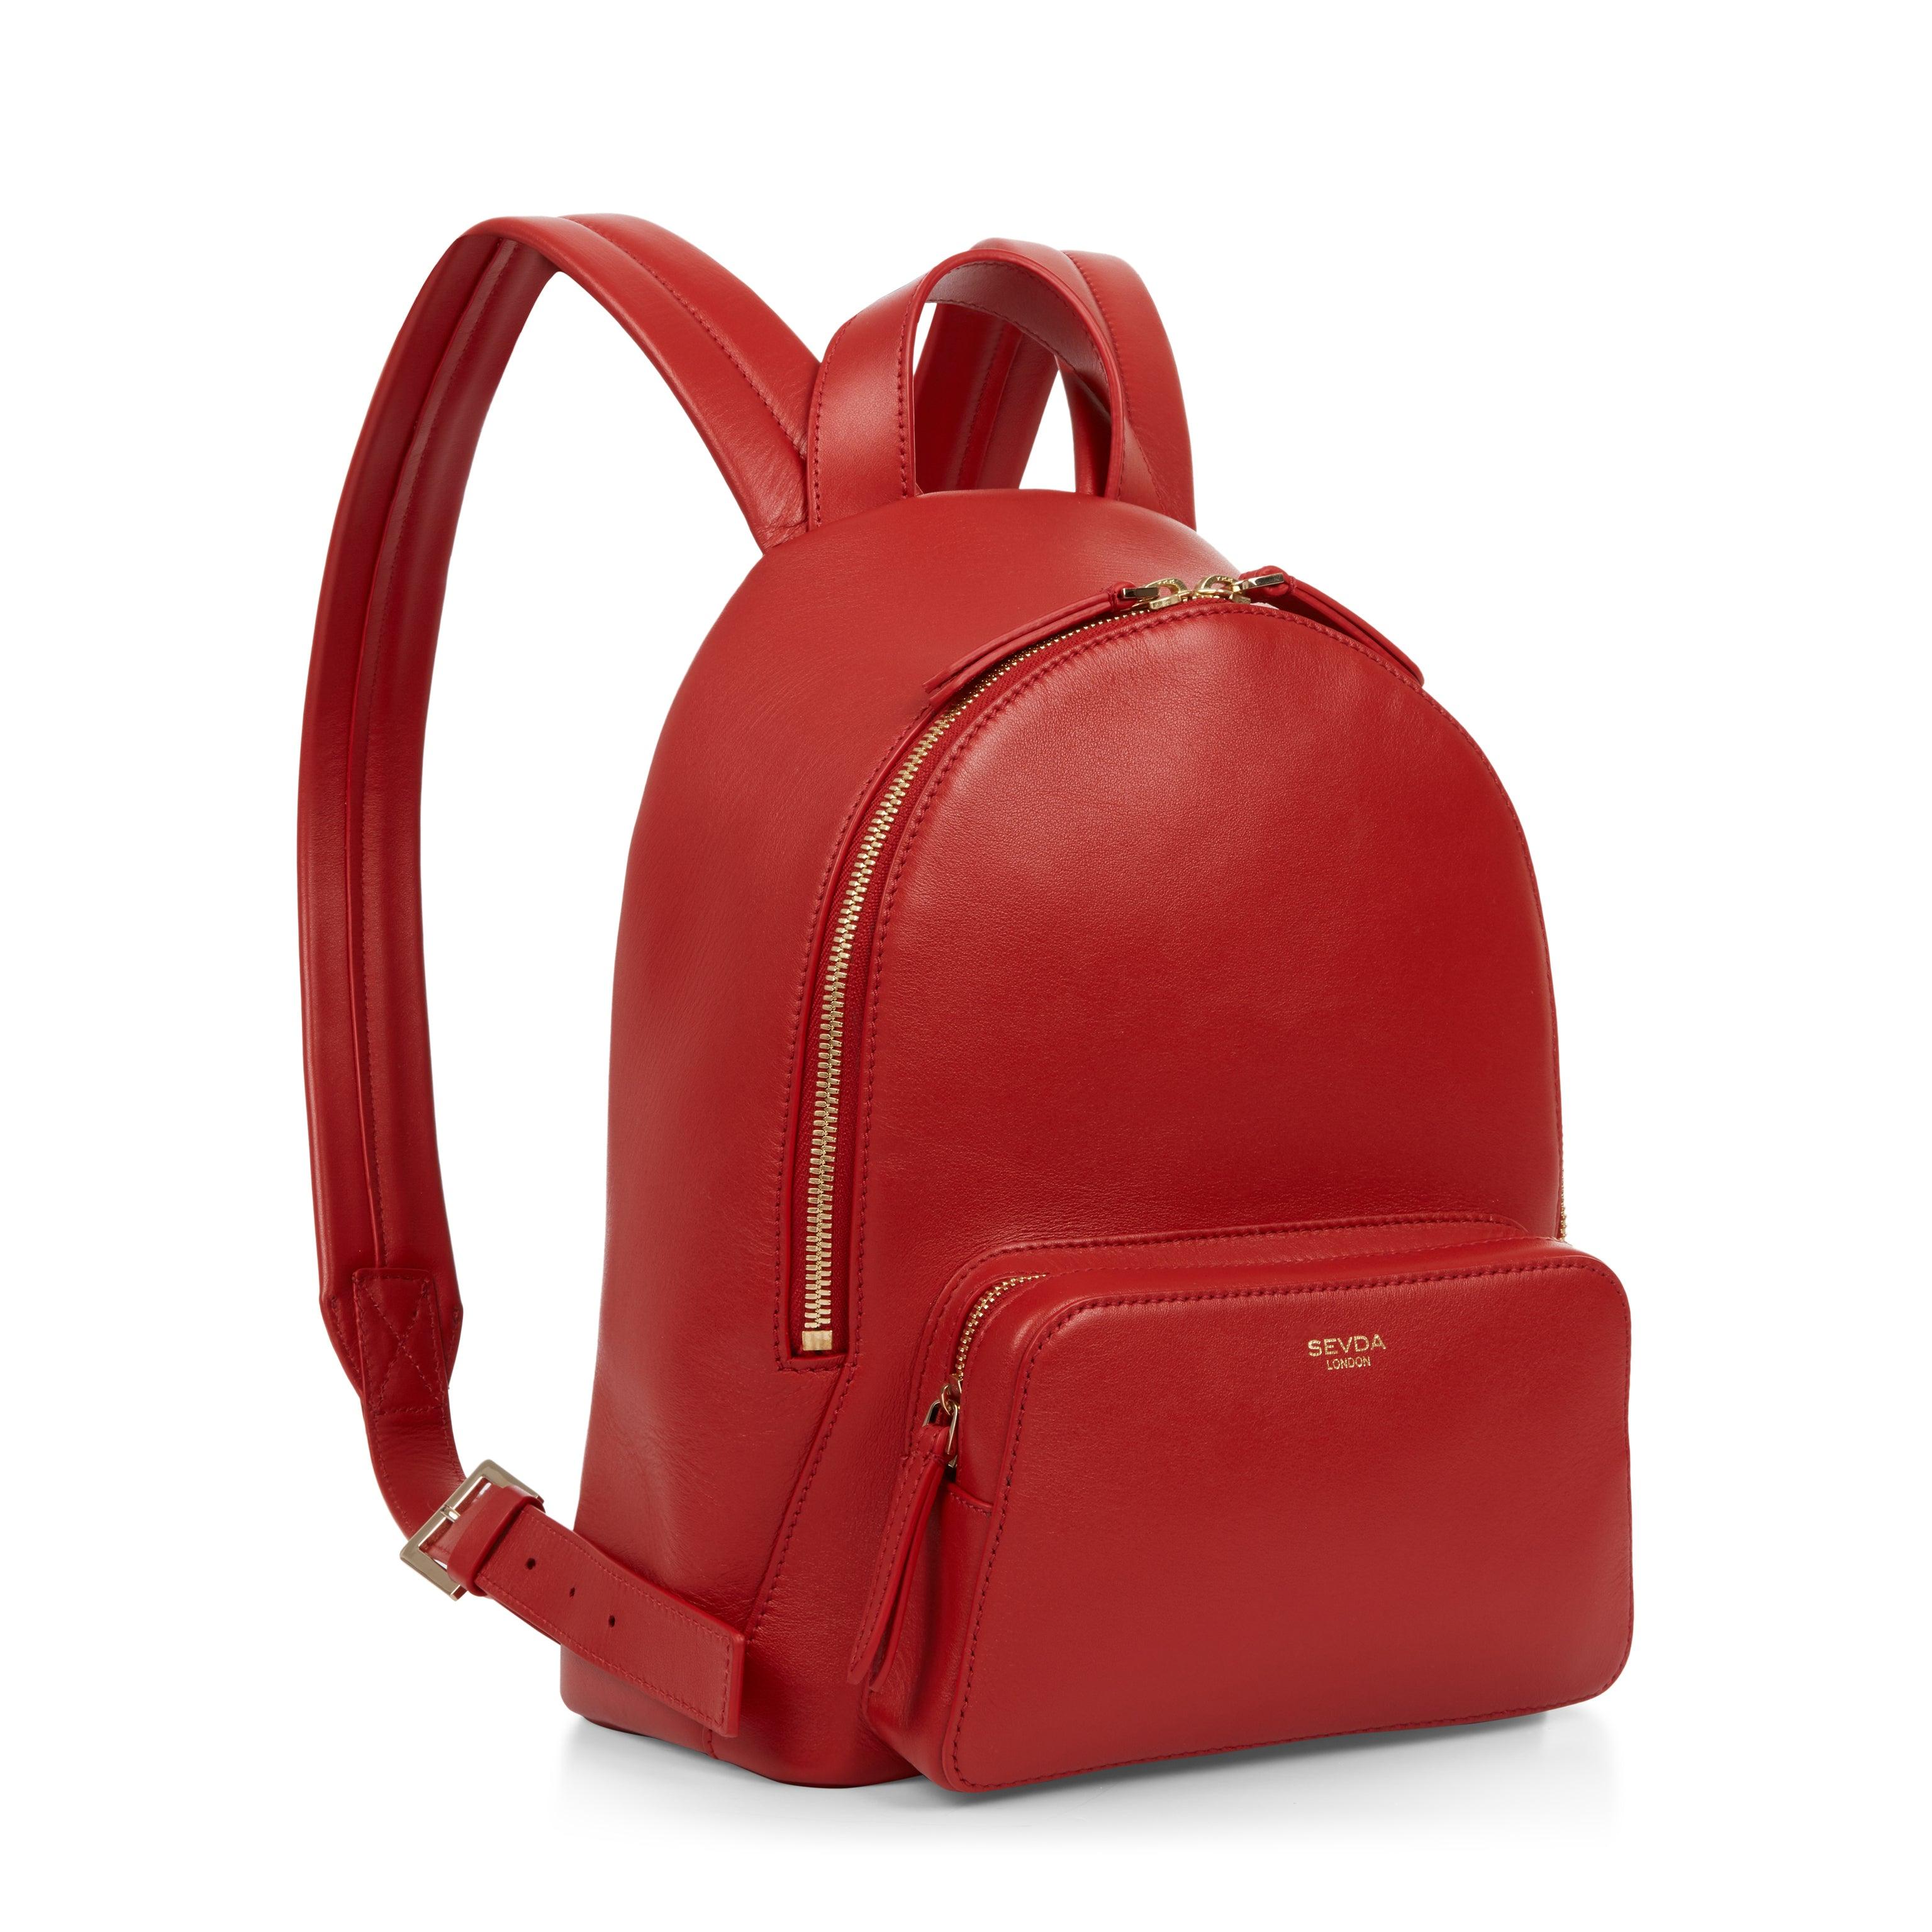 Emma Designer Backpack in Red - A masterpiece of Italian craftsmanship in responsibly sourced leather.